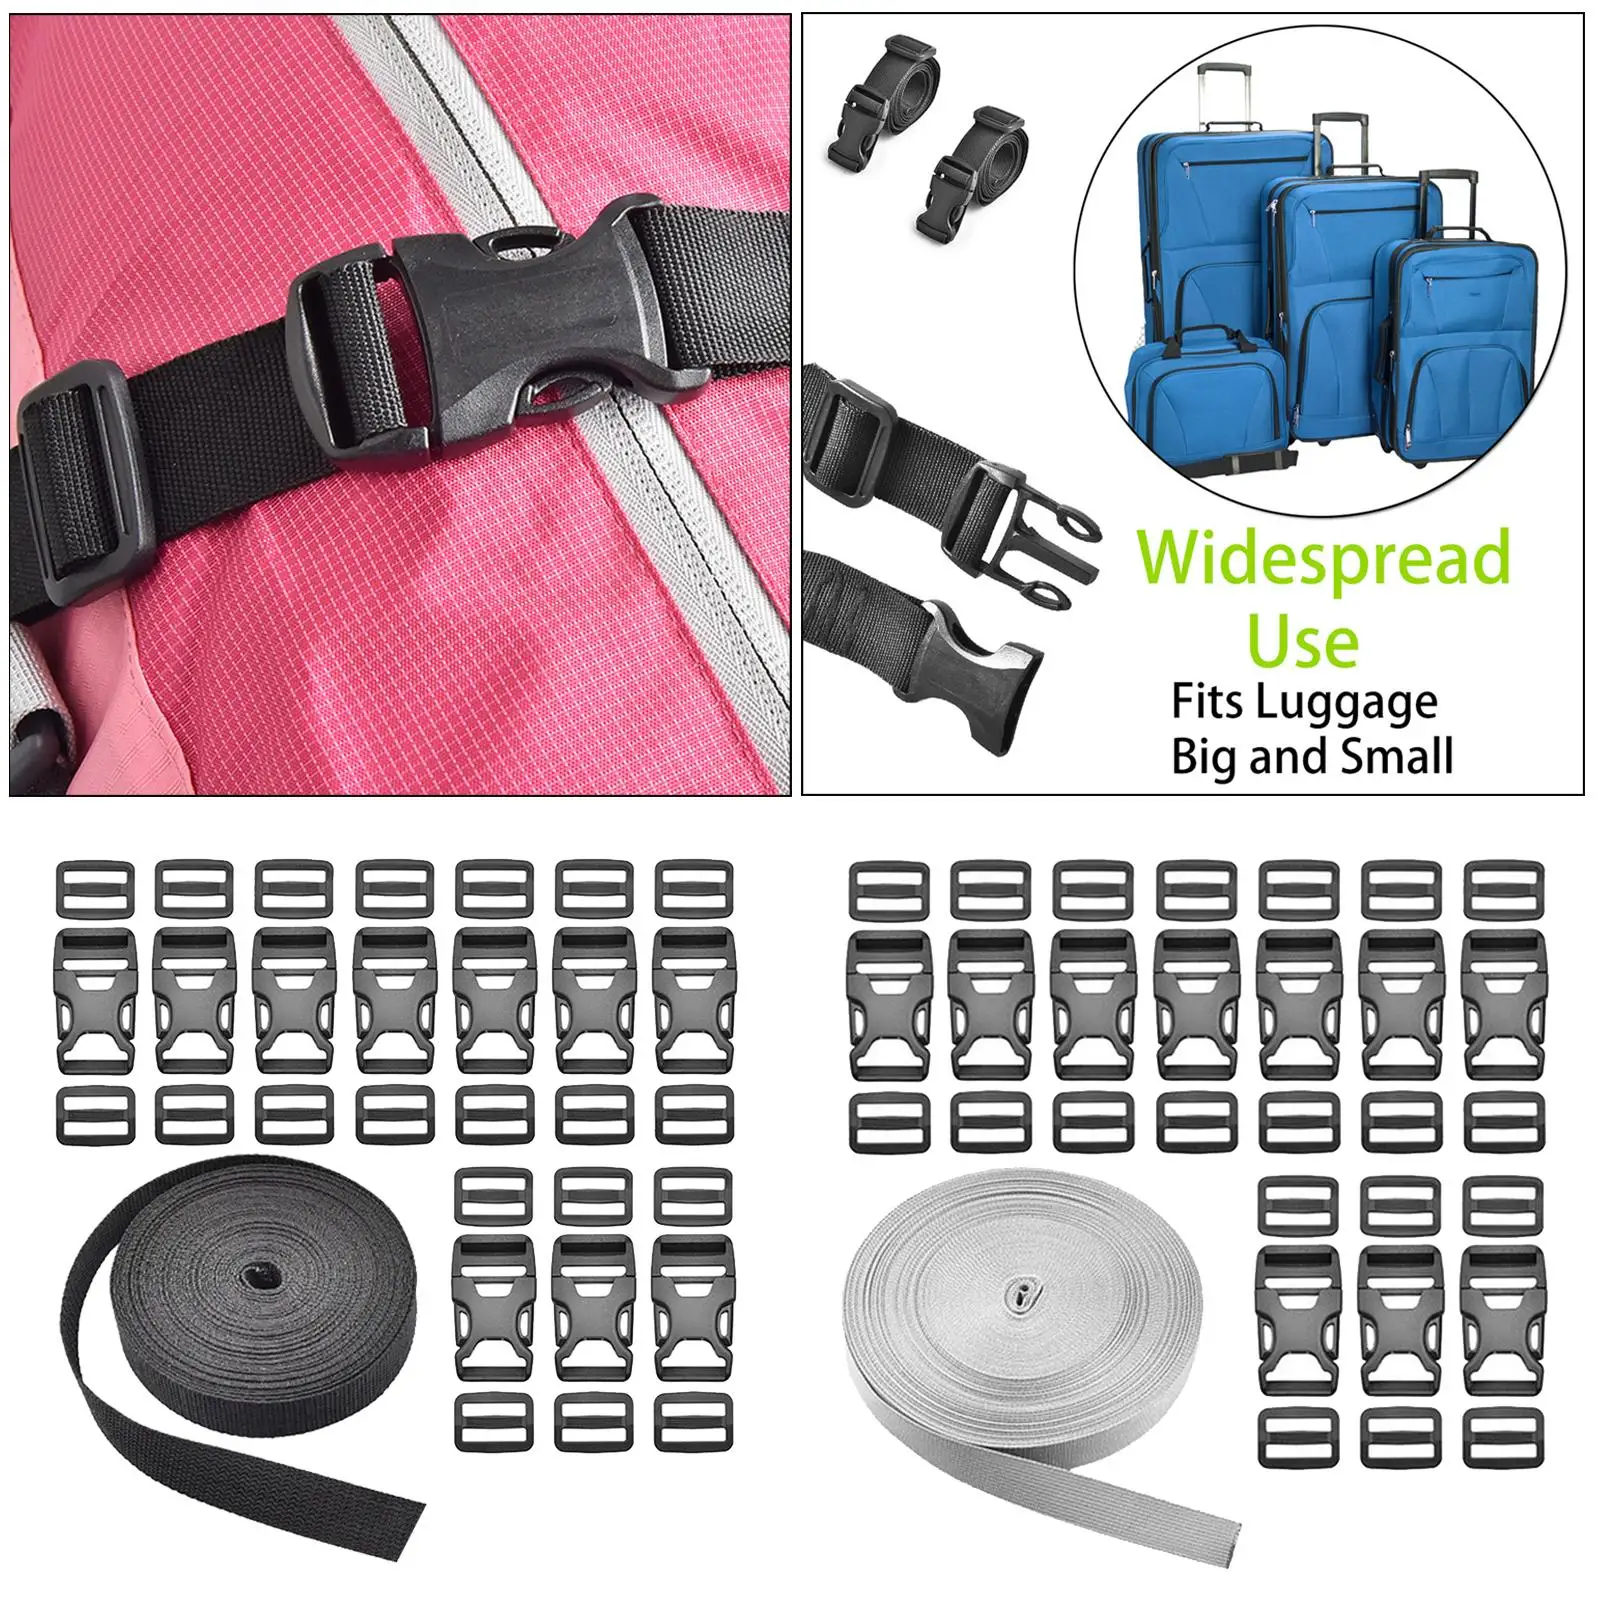 Adjustable tie Straps, Heavy Duty Travel Luggage Lashing Strap Ratchet Straps,  Strap with Buckle Suitable for Carrying Various